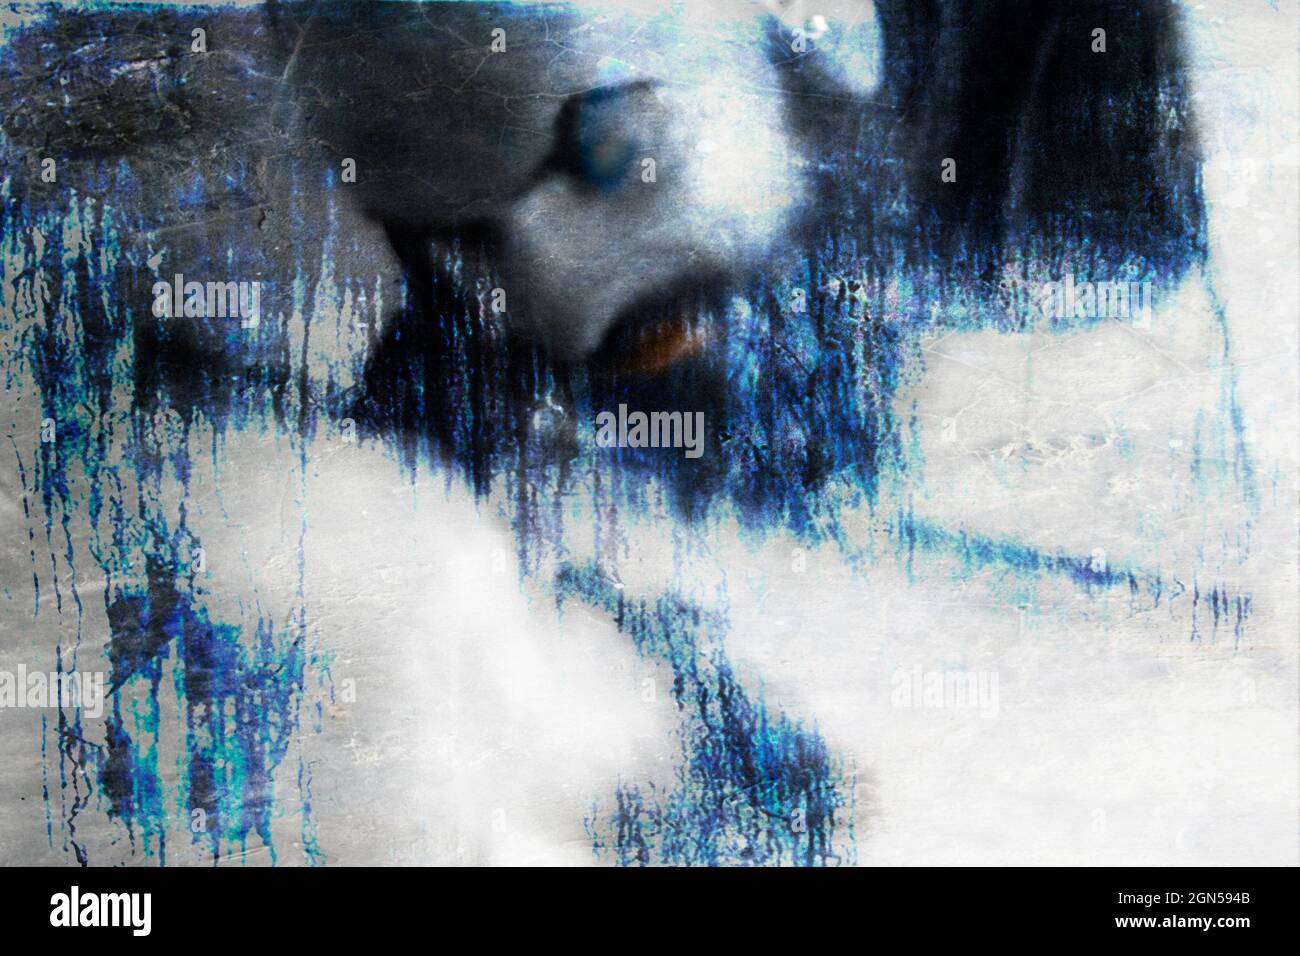 Surreal portrait of a man. The blurred human face blends in with the original background. Mystical scene. Halloween concept. Stock Photo